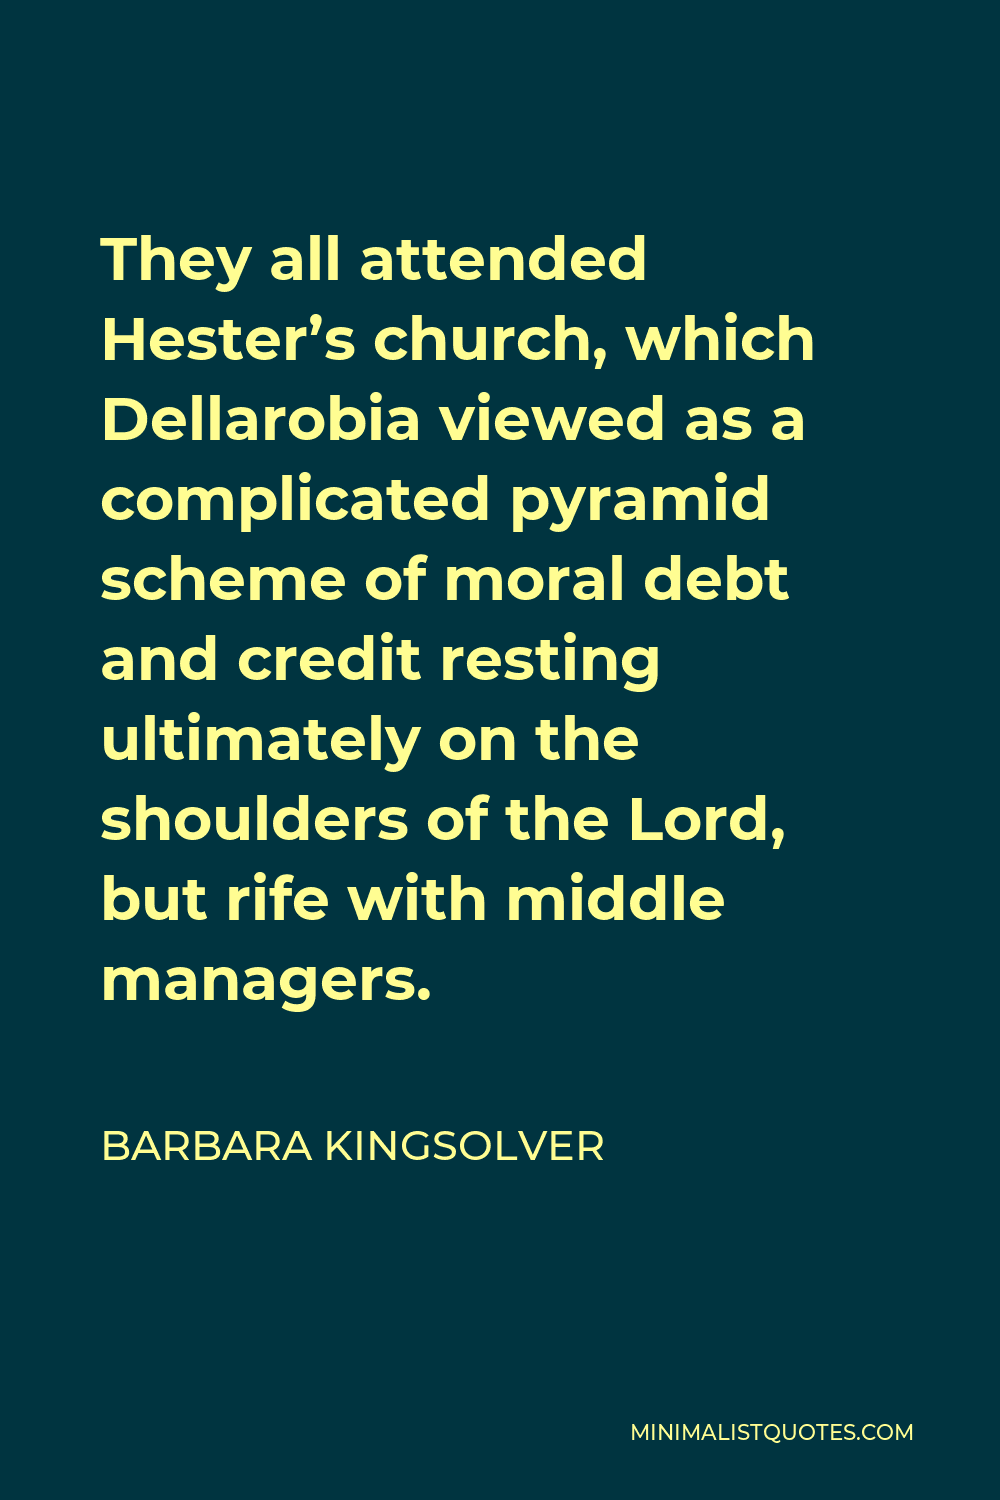 Barbara Kingsolver Quote - They all attended Hester’s church, which Dellarobia viewed as a complicated pyramid scheme of moral debt and credit resting ultimately on the shoulders of the Lord, but rife with middle managers.